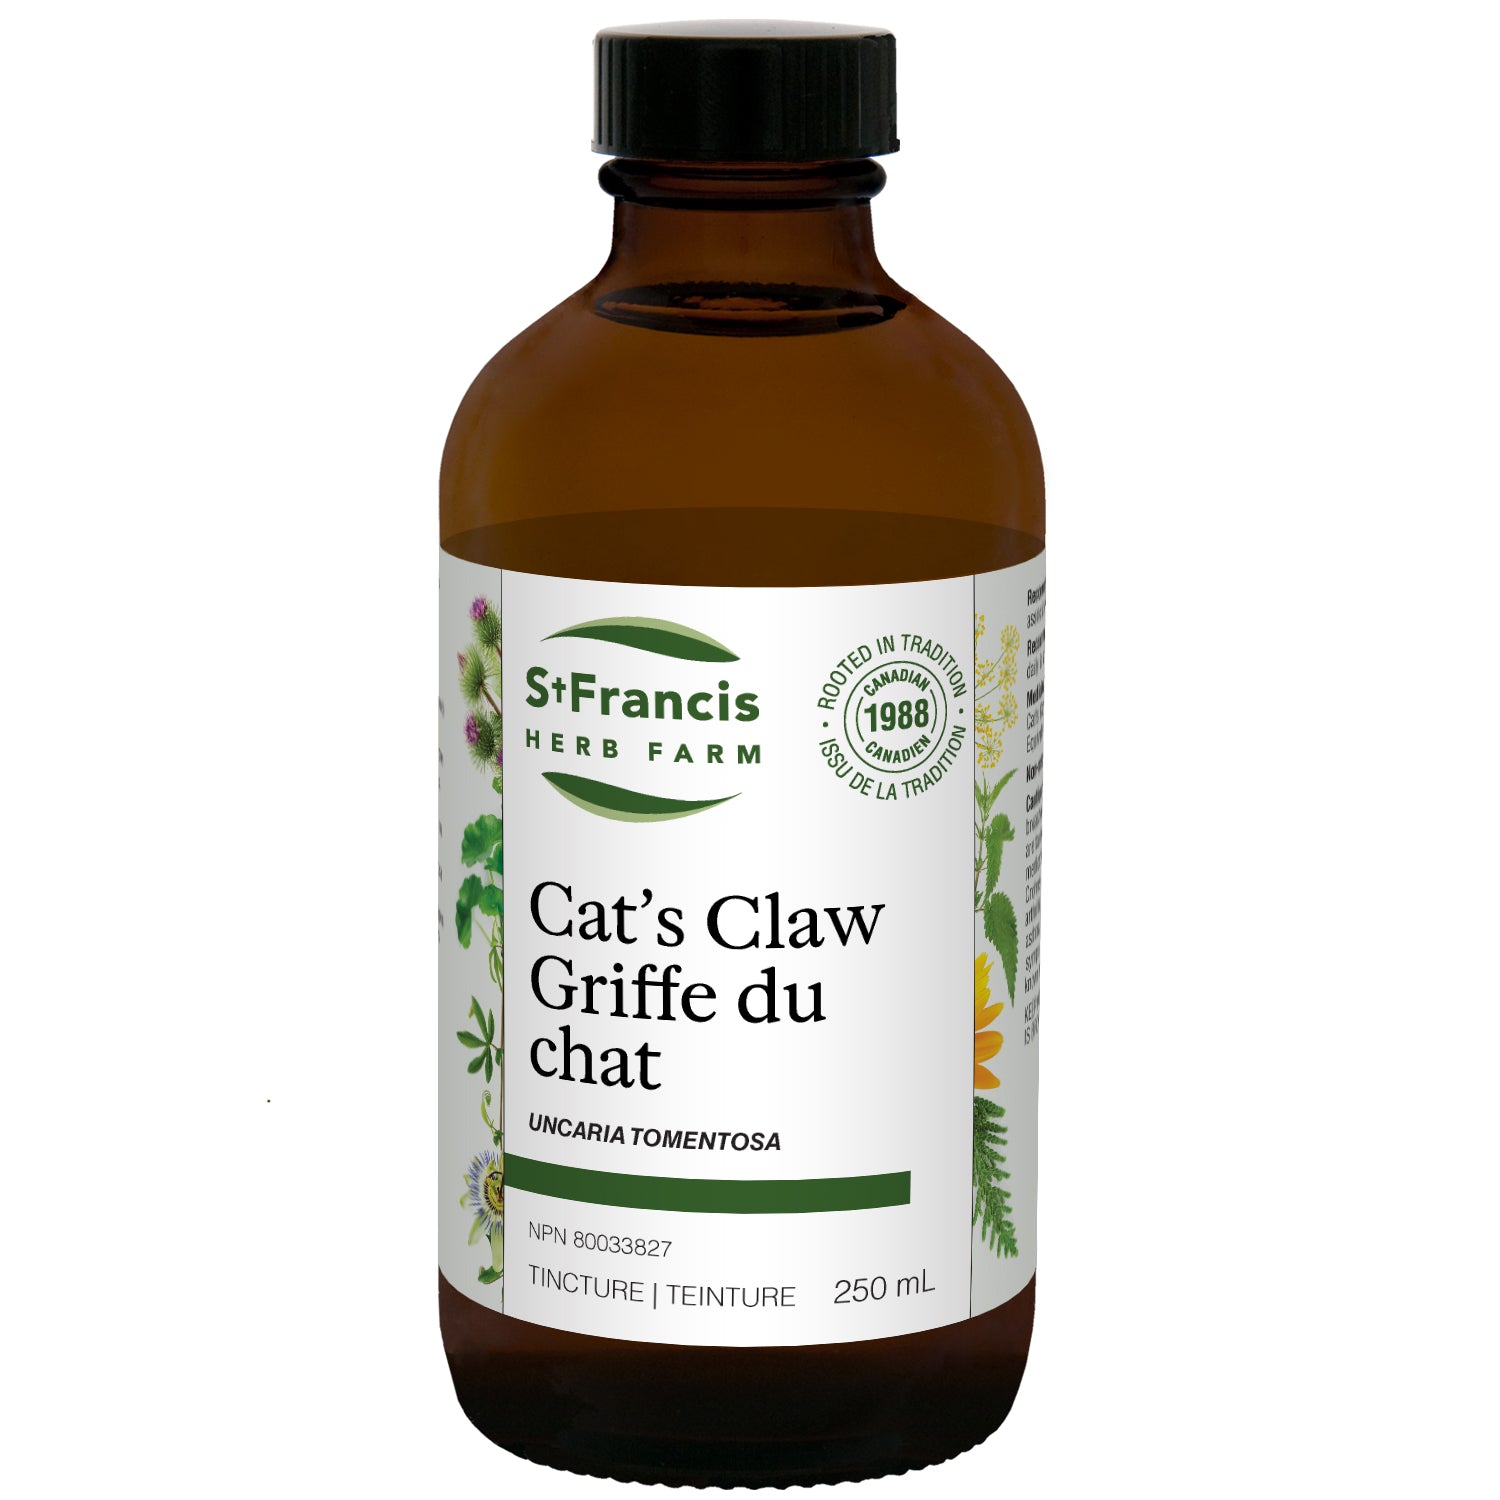 St. Francis Cat's Claw Tincture 250ml